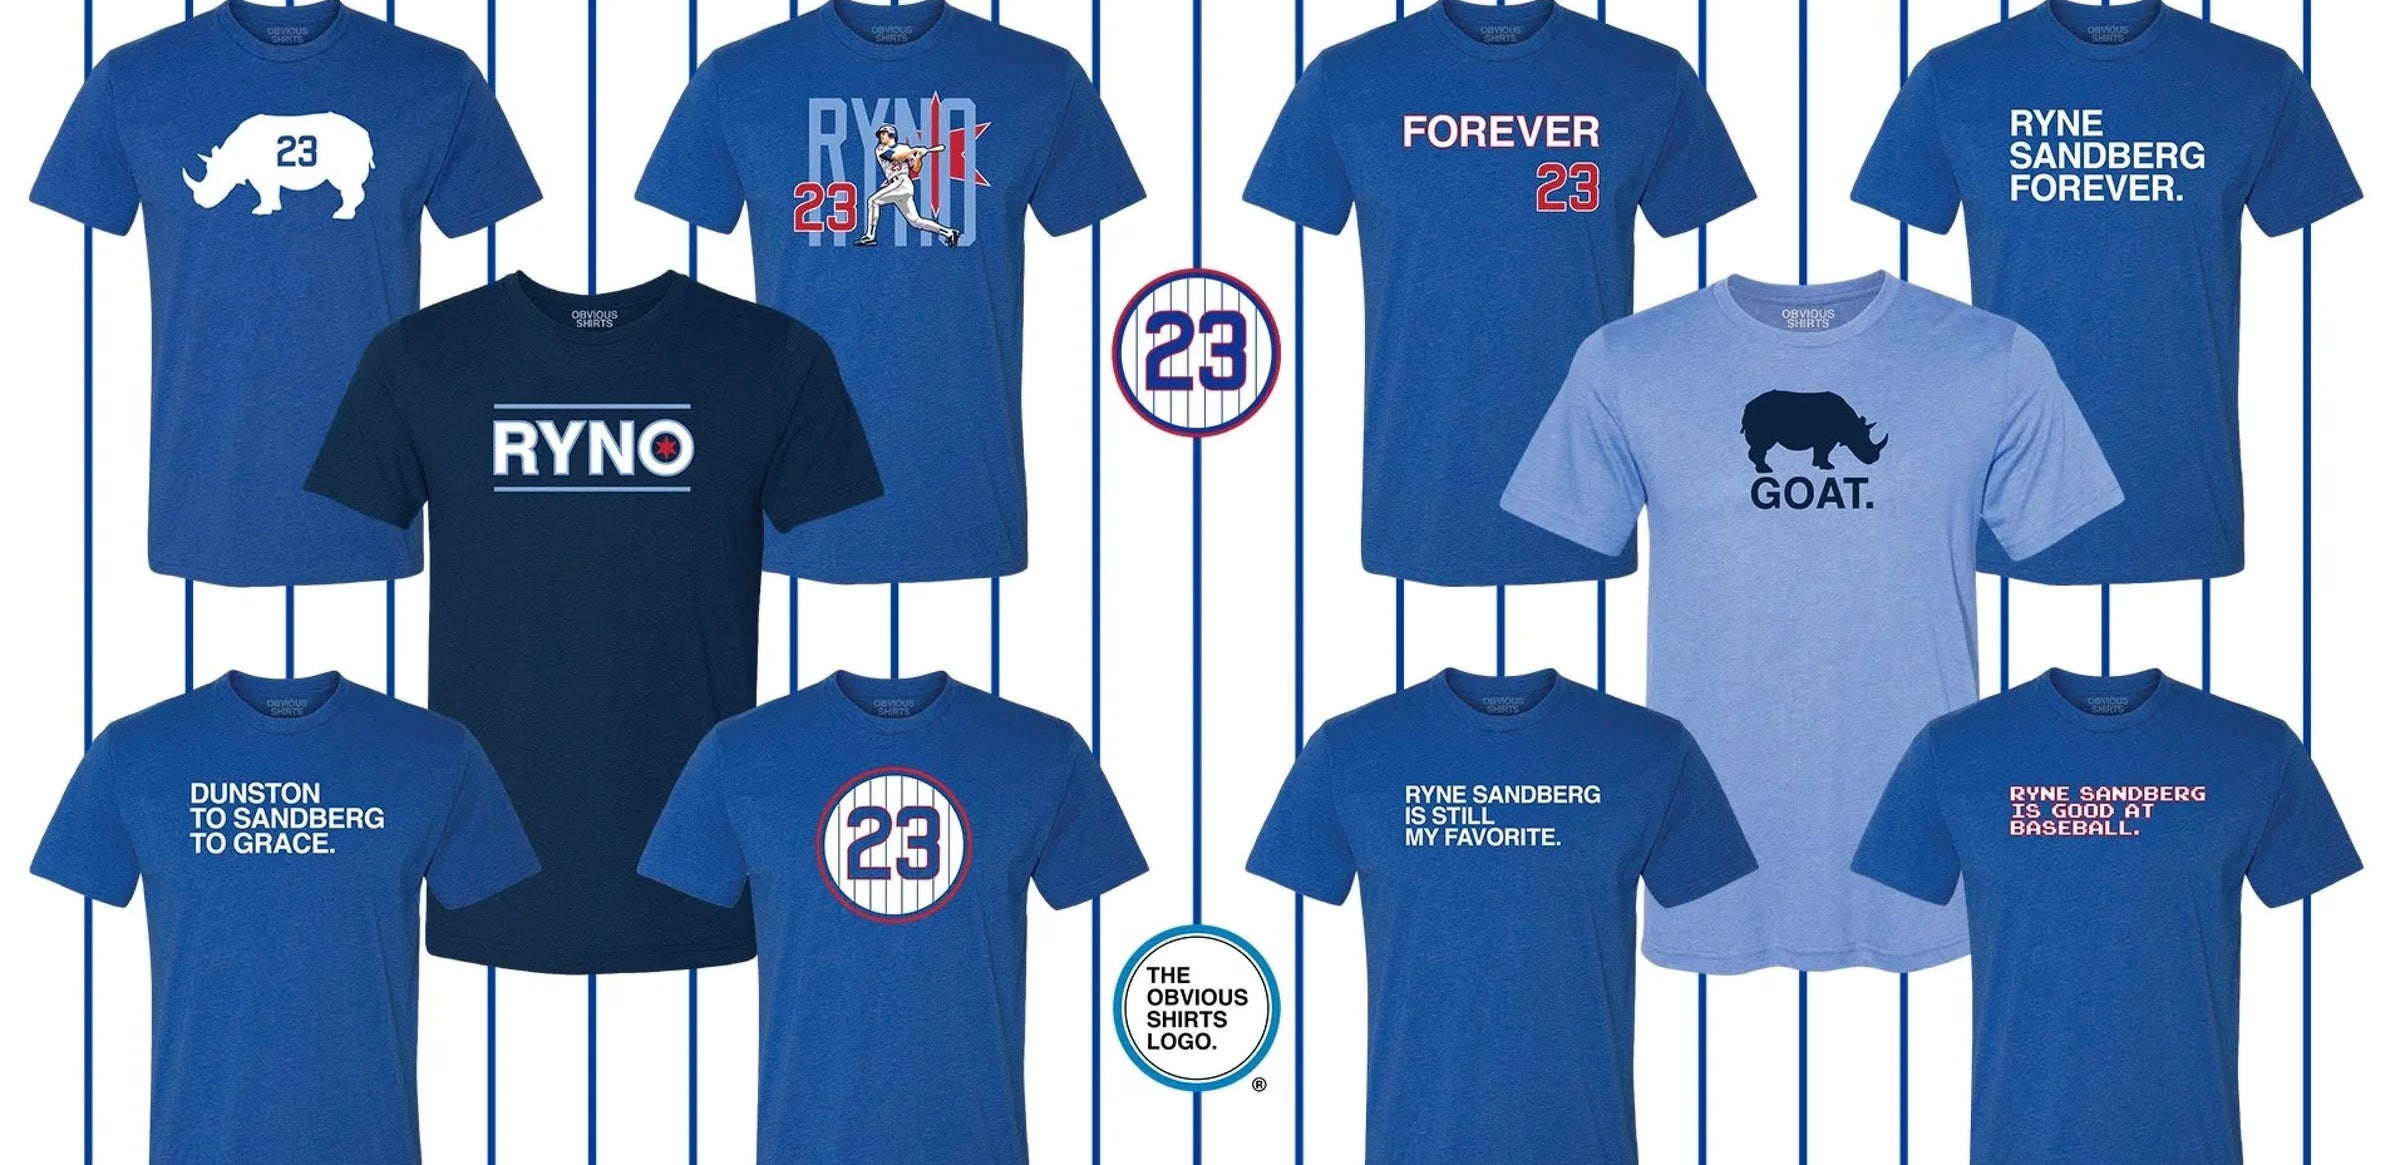 Obvious Shirts Opens Wrigleyville Store On Opening Day: 'Cubs